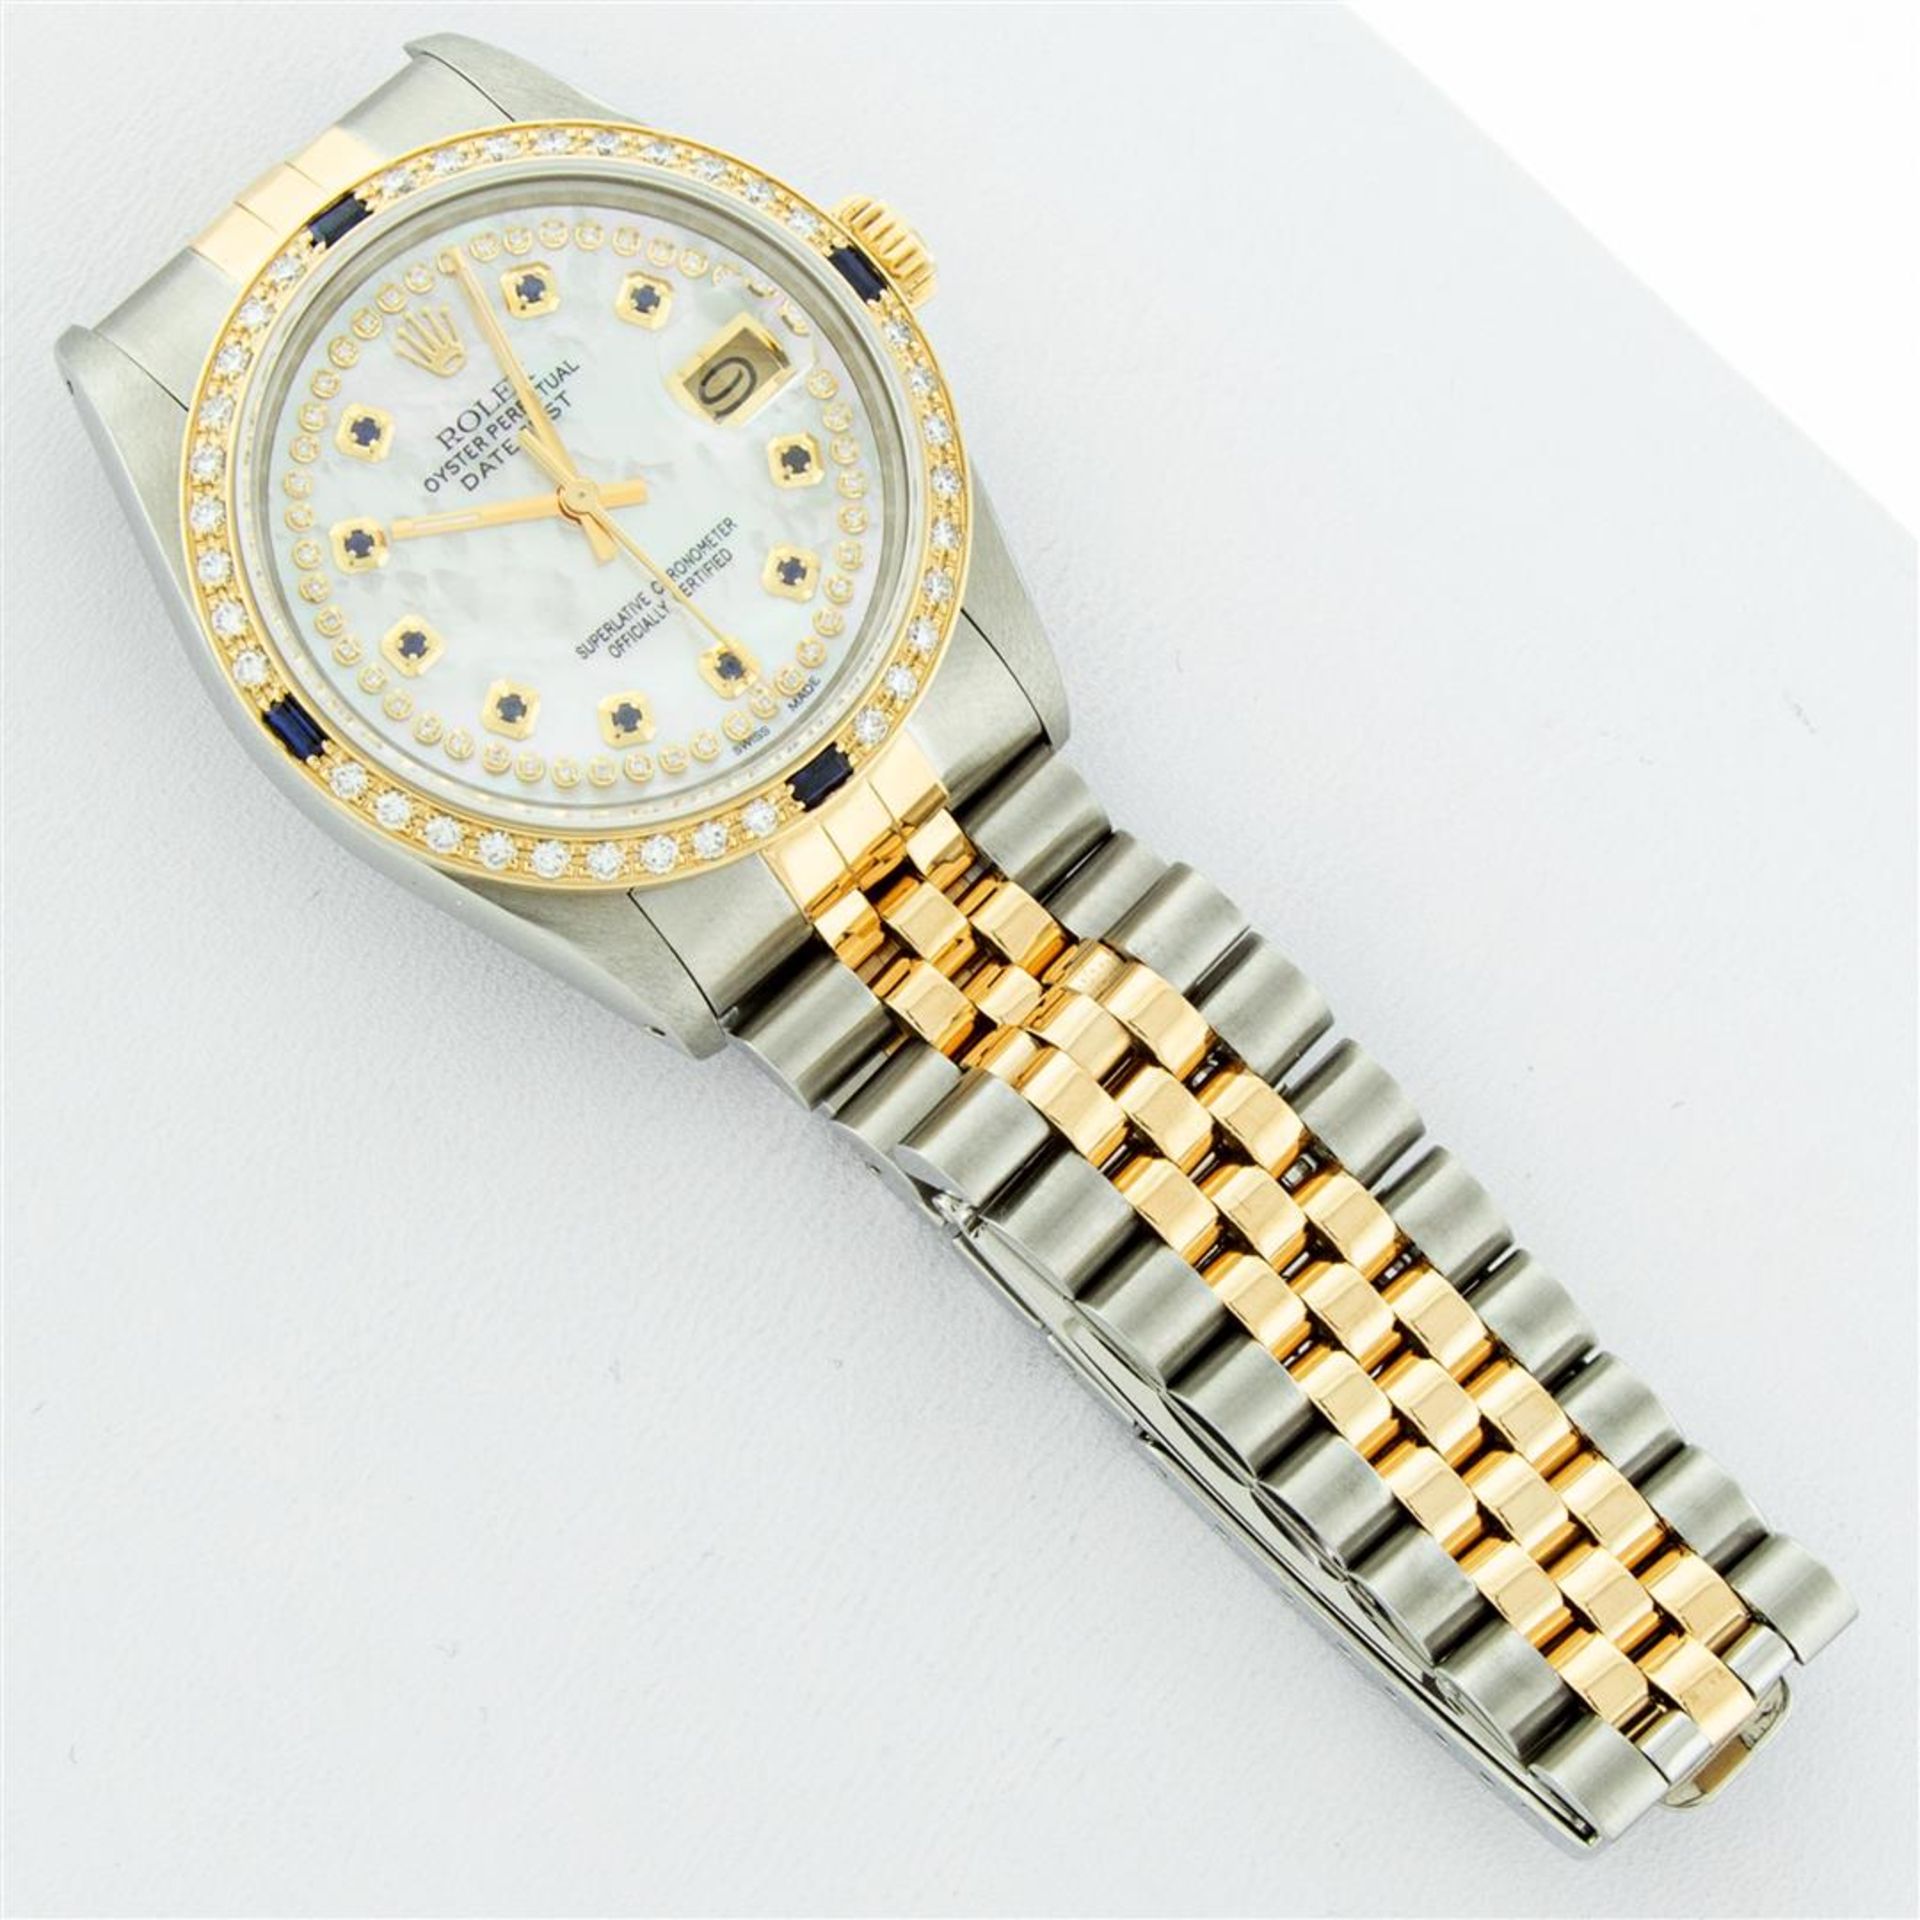 Rolex Mens 2 Tone Mother Of Pearl Diamond & Sapphire Datejust Wristwatch - Image 7 of 9